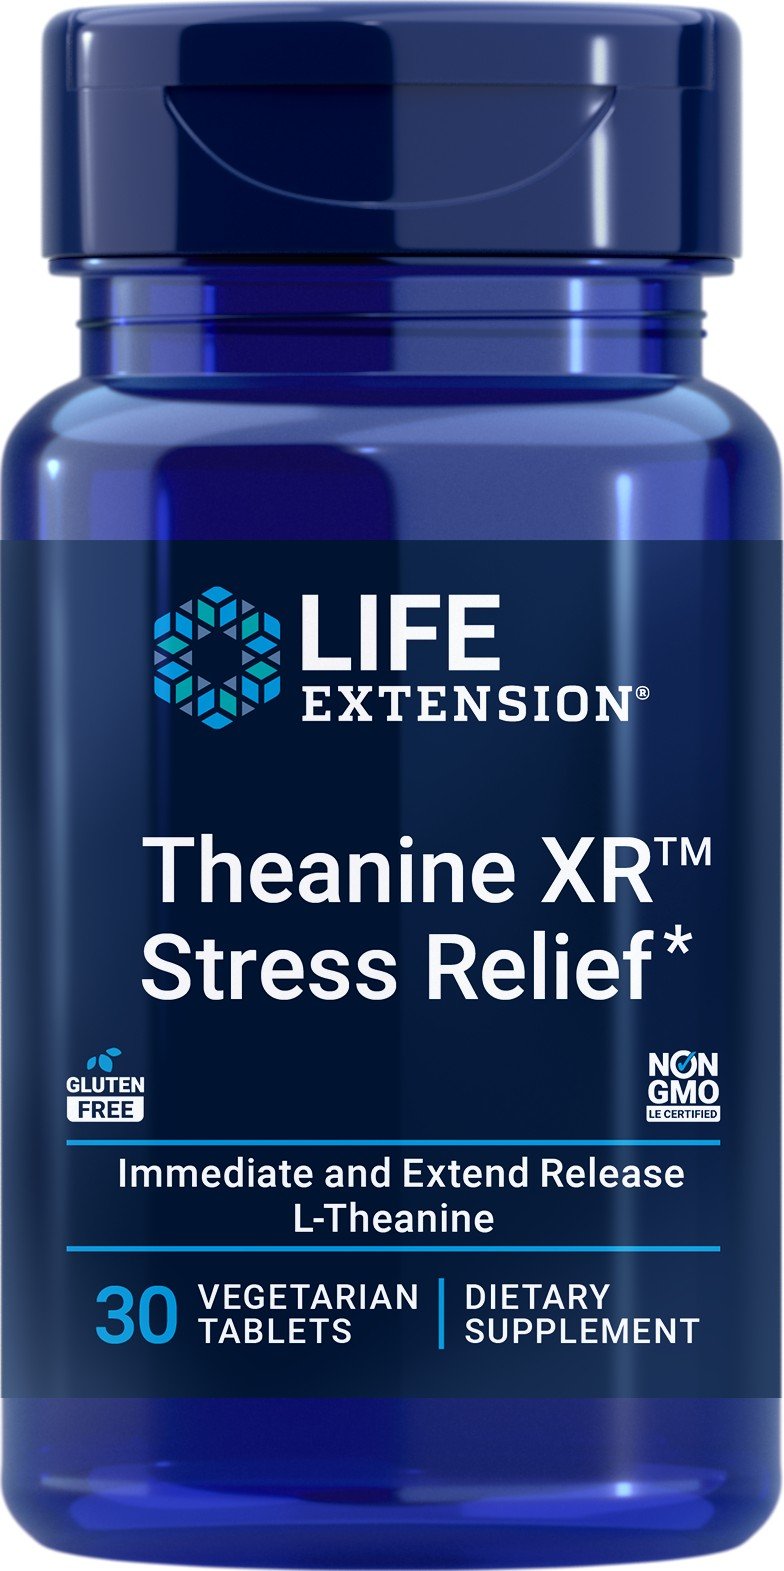 Life Extension Theanine XR Stress Relief 30 Tablet